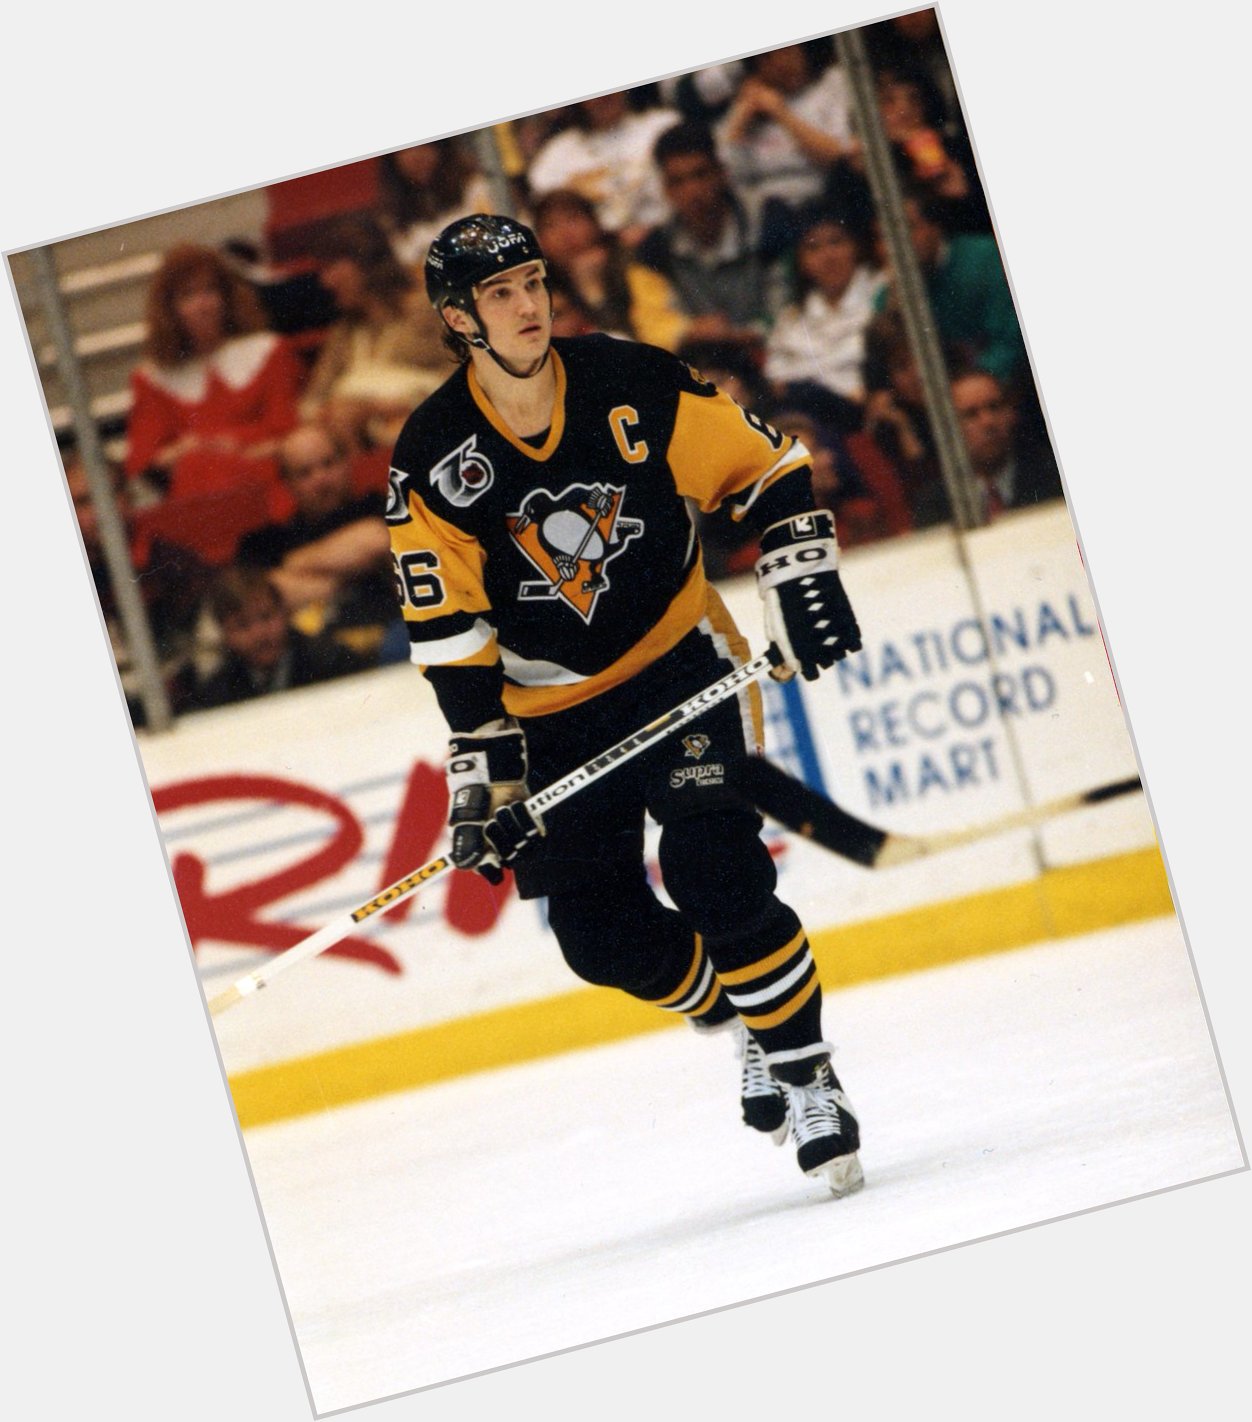 Happy 52nd bday to former Penguin great Mario Lemieux; one of the greatest hockey players ever 